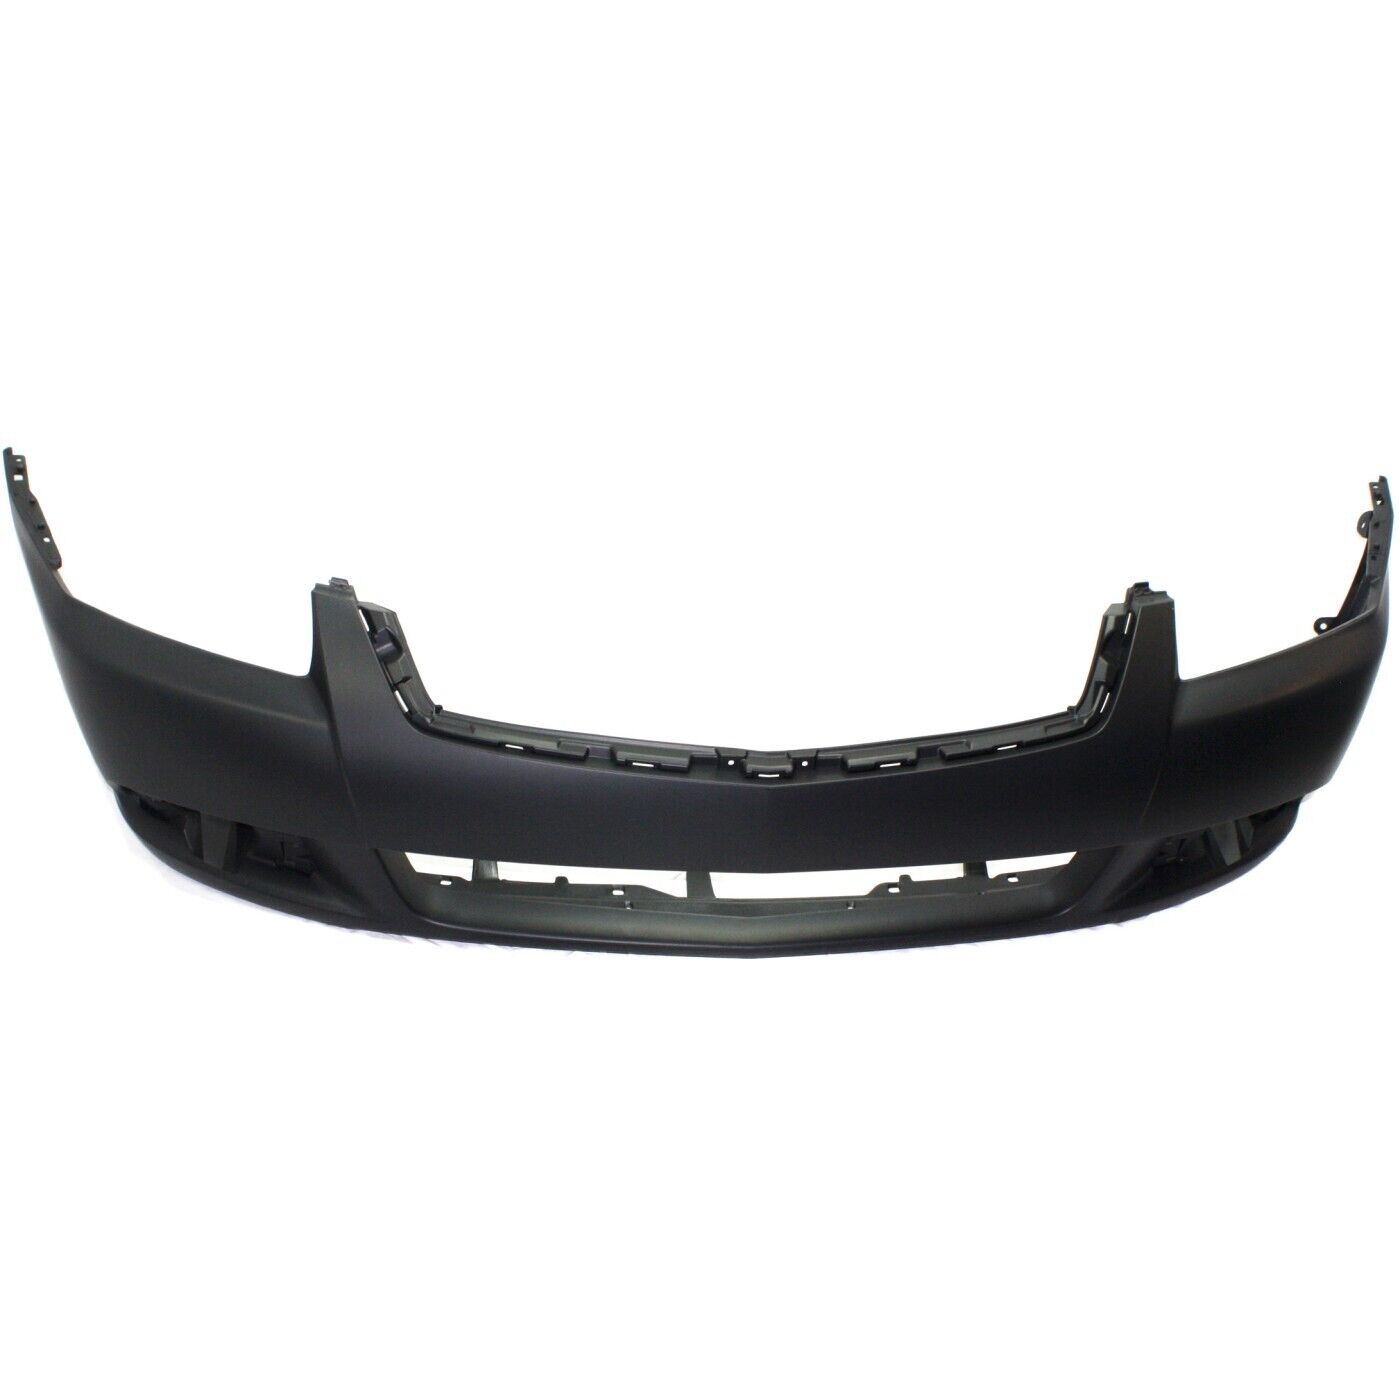 Bumper Cover For 2009-2012 Mitsubishi Galant Front Primed 6400C626